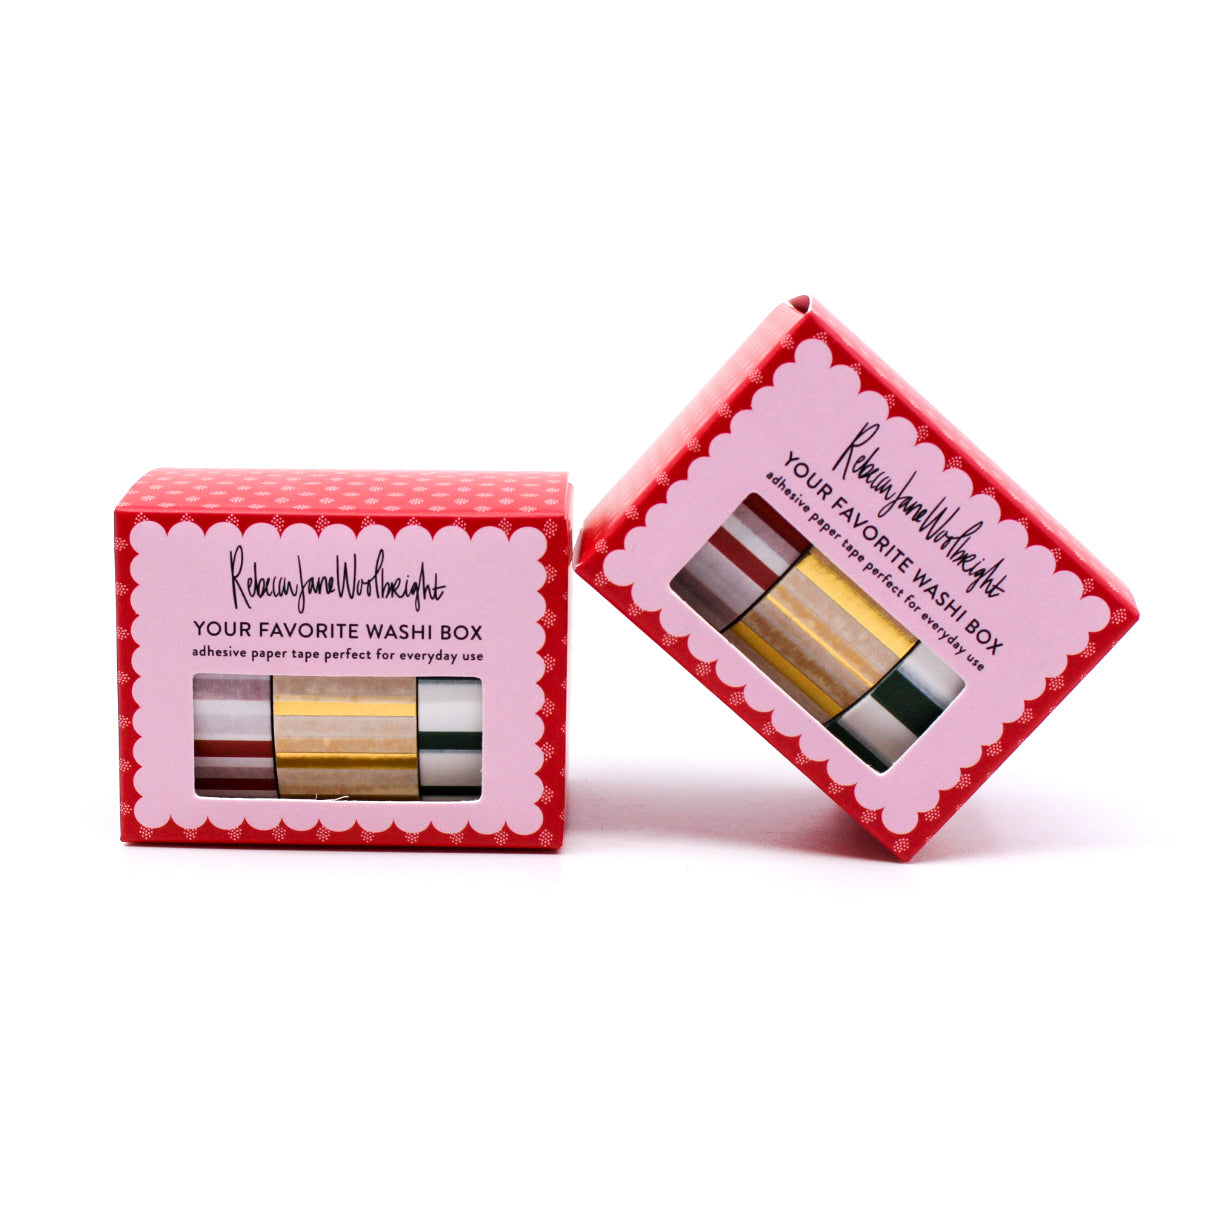 Favorites Holiday Stripe Washi Tape Set featuring a vibrant mix of festive stripes in traditional Christmas colors, ideal for adding a joyful and decorative touch to your holiday-themed crafts and projects. This set is from Rebecca Jane Woolbright and sold at BBB Supplies Craft Shop.